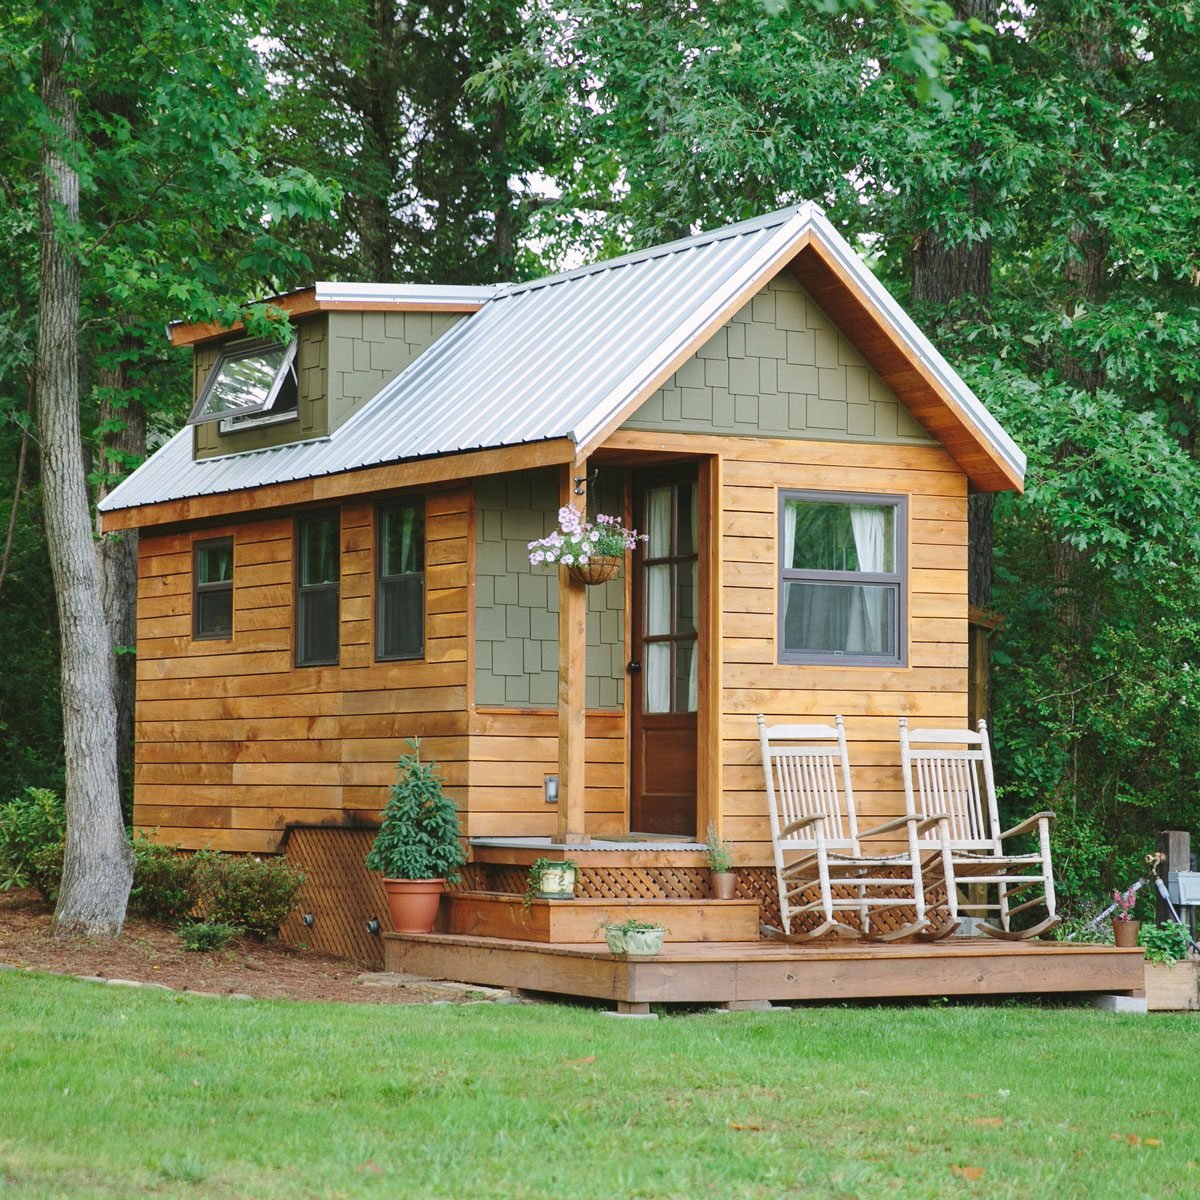 14 Amazing Tiny Homes: Pictures Inside & Out